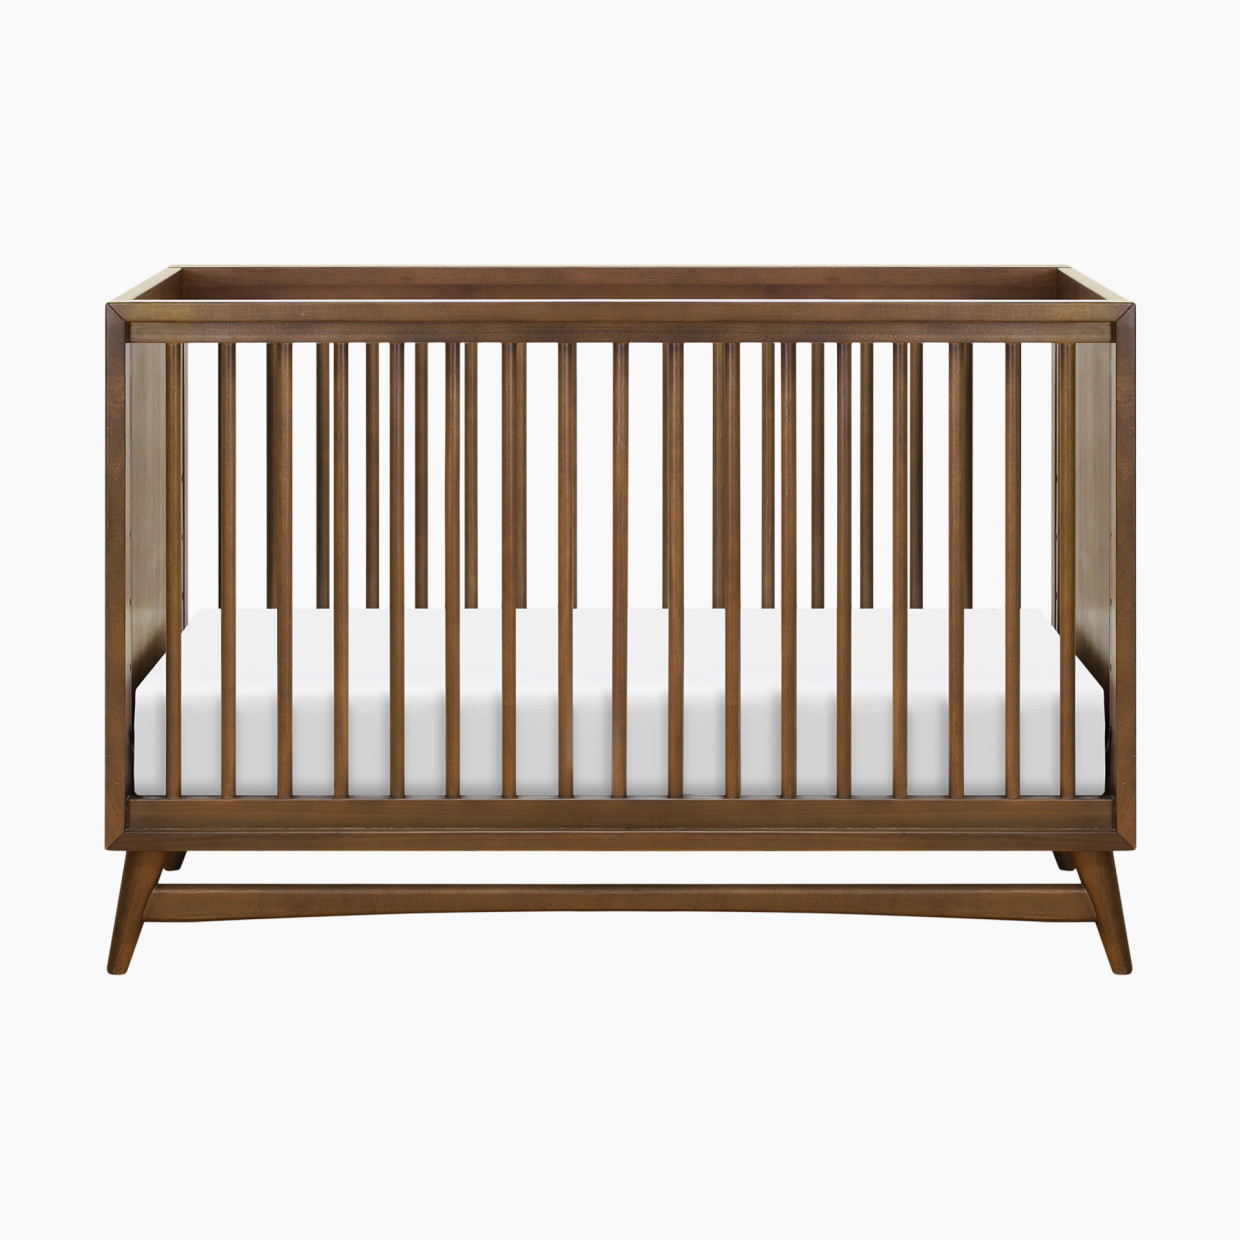 babyletto Peggy 3-in-1 Crib with Toddler Bed Conversion Kit - Natural Walnut.